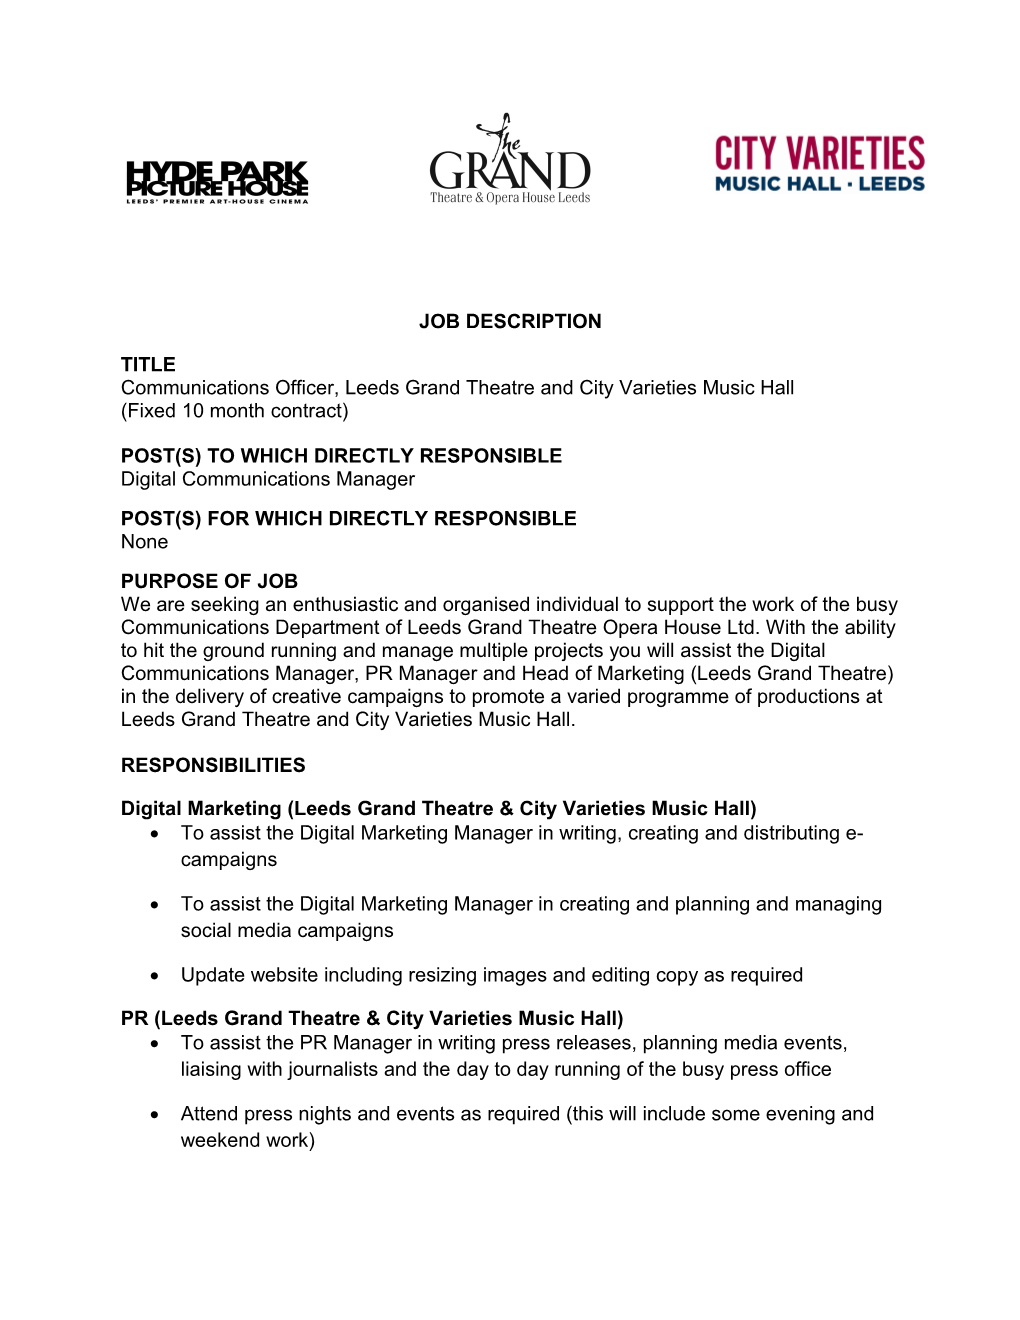 Communications Officer, Leeds Grand Theatre and City Varieties Music Hall